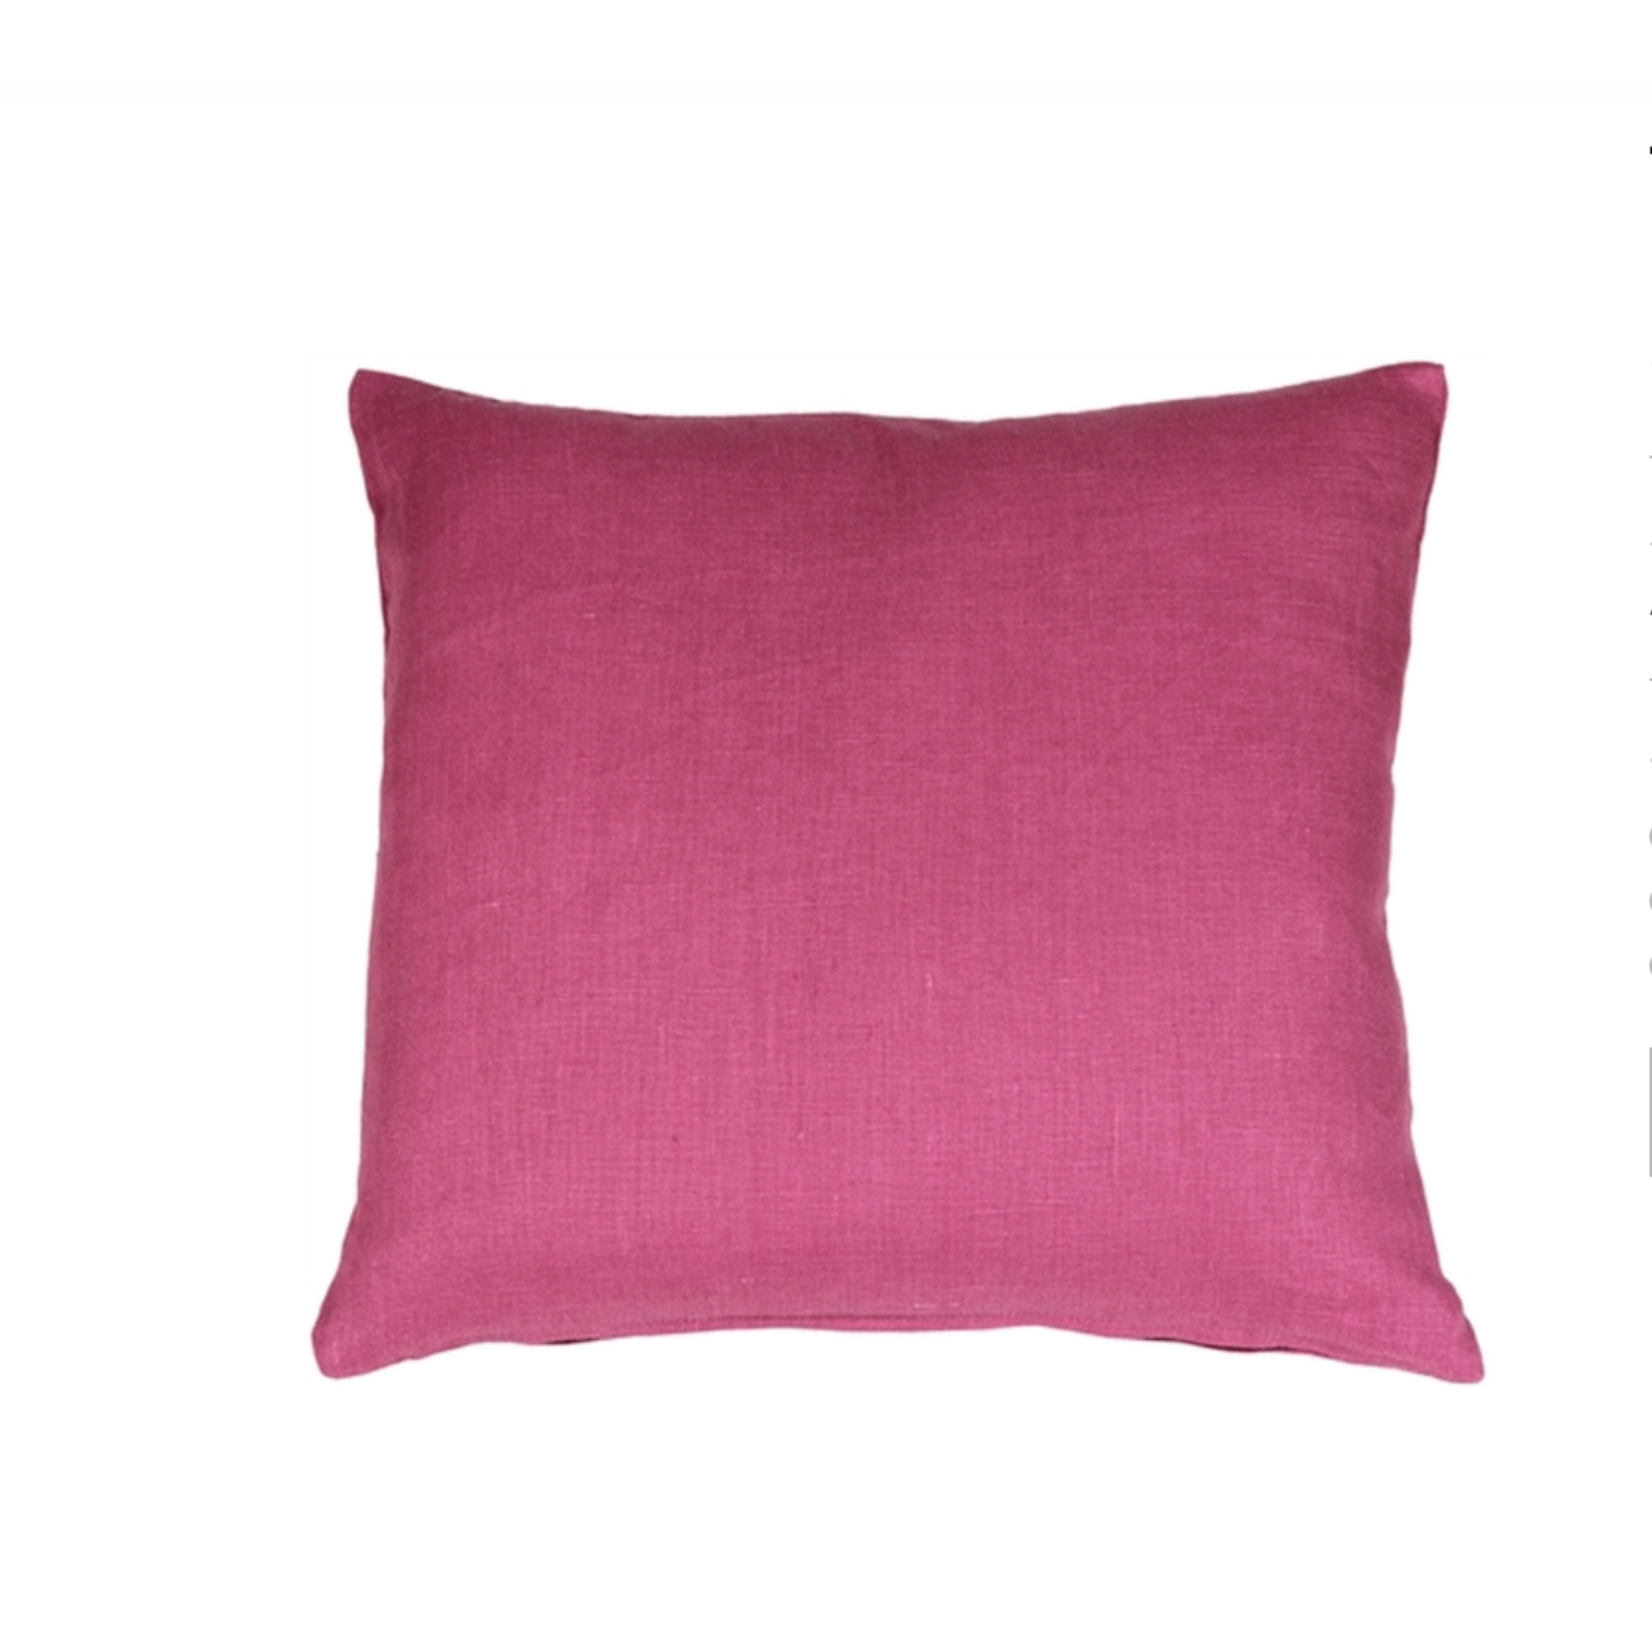 Tuscany Linen Orchid Pink Throw Pillow Cover 20 x 20